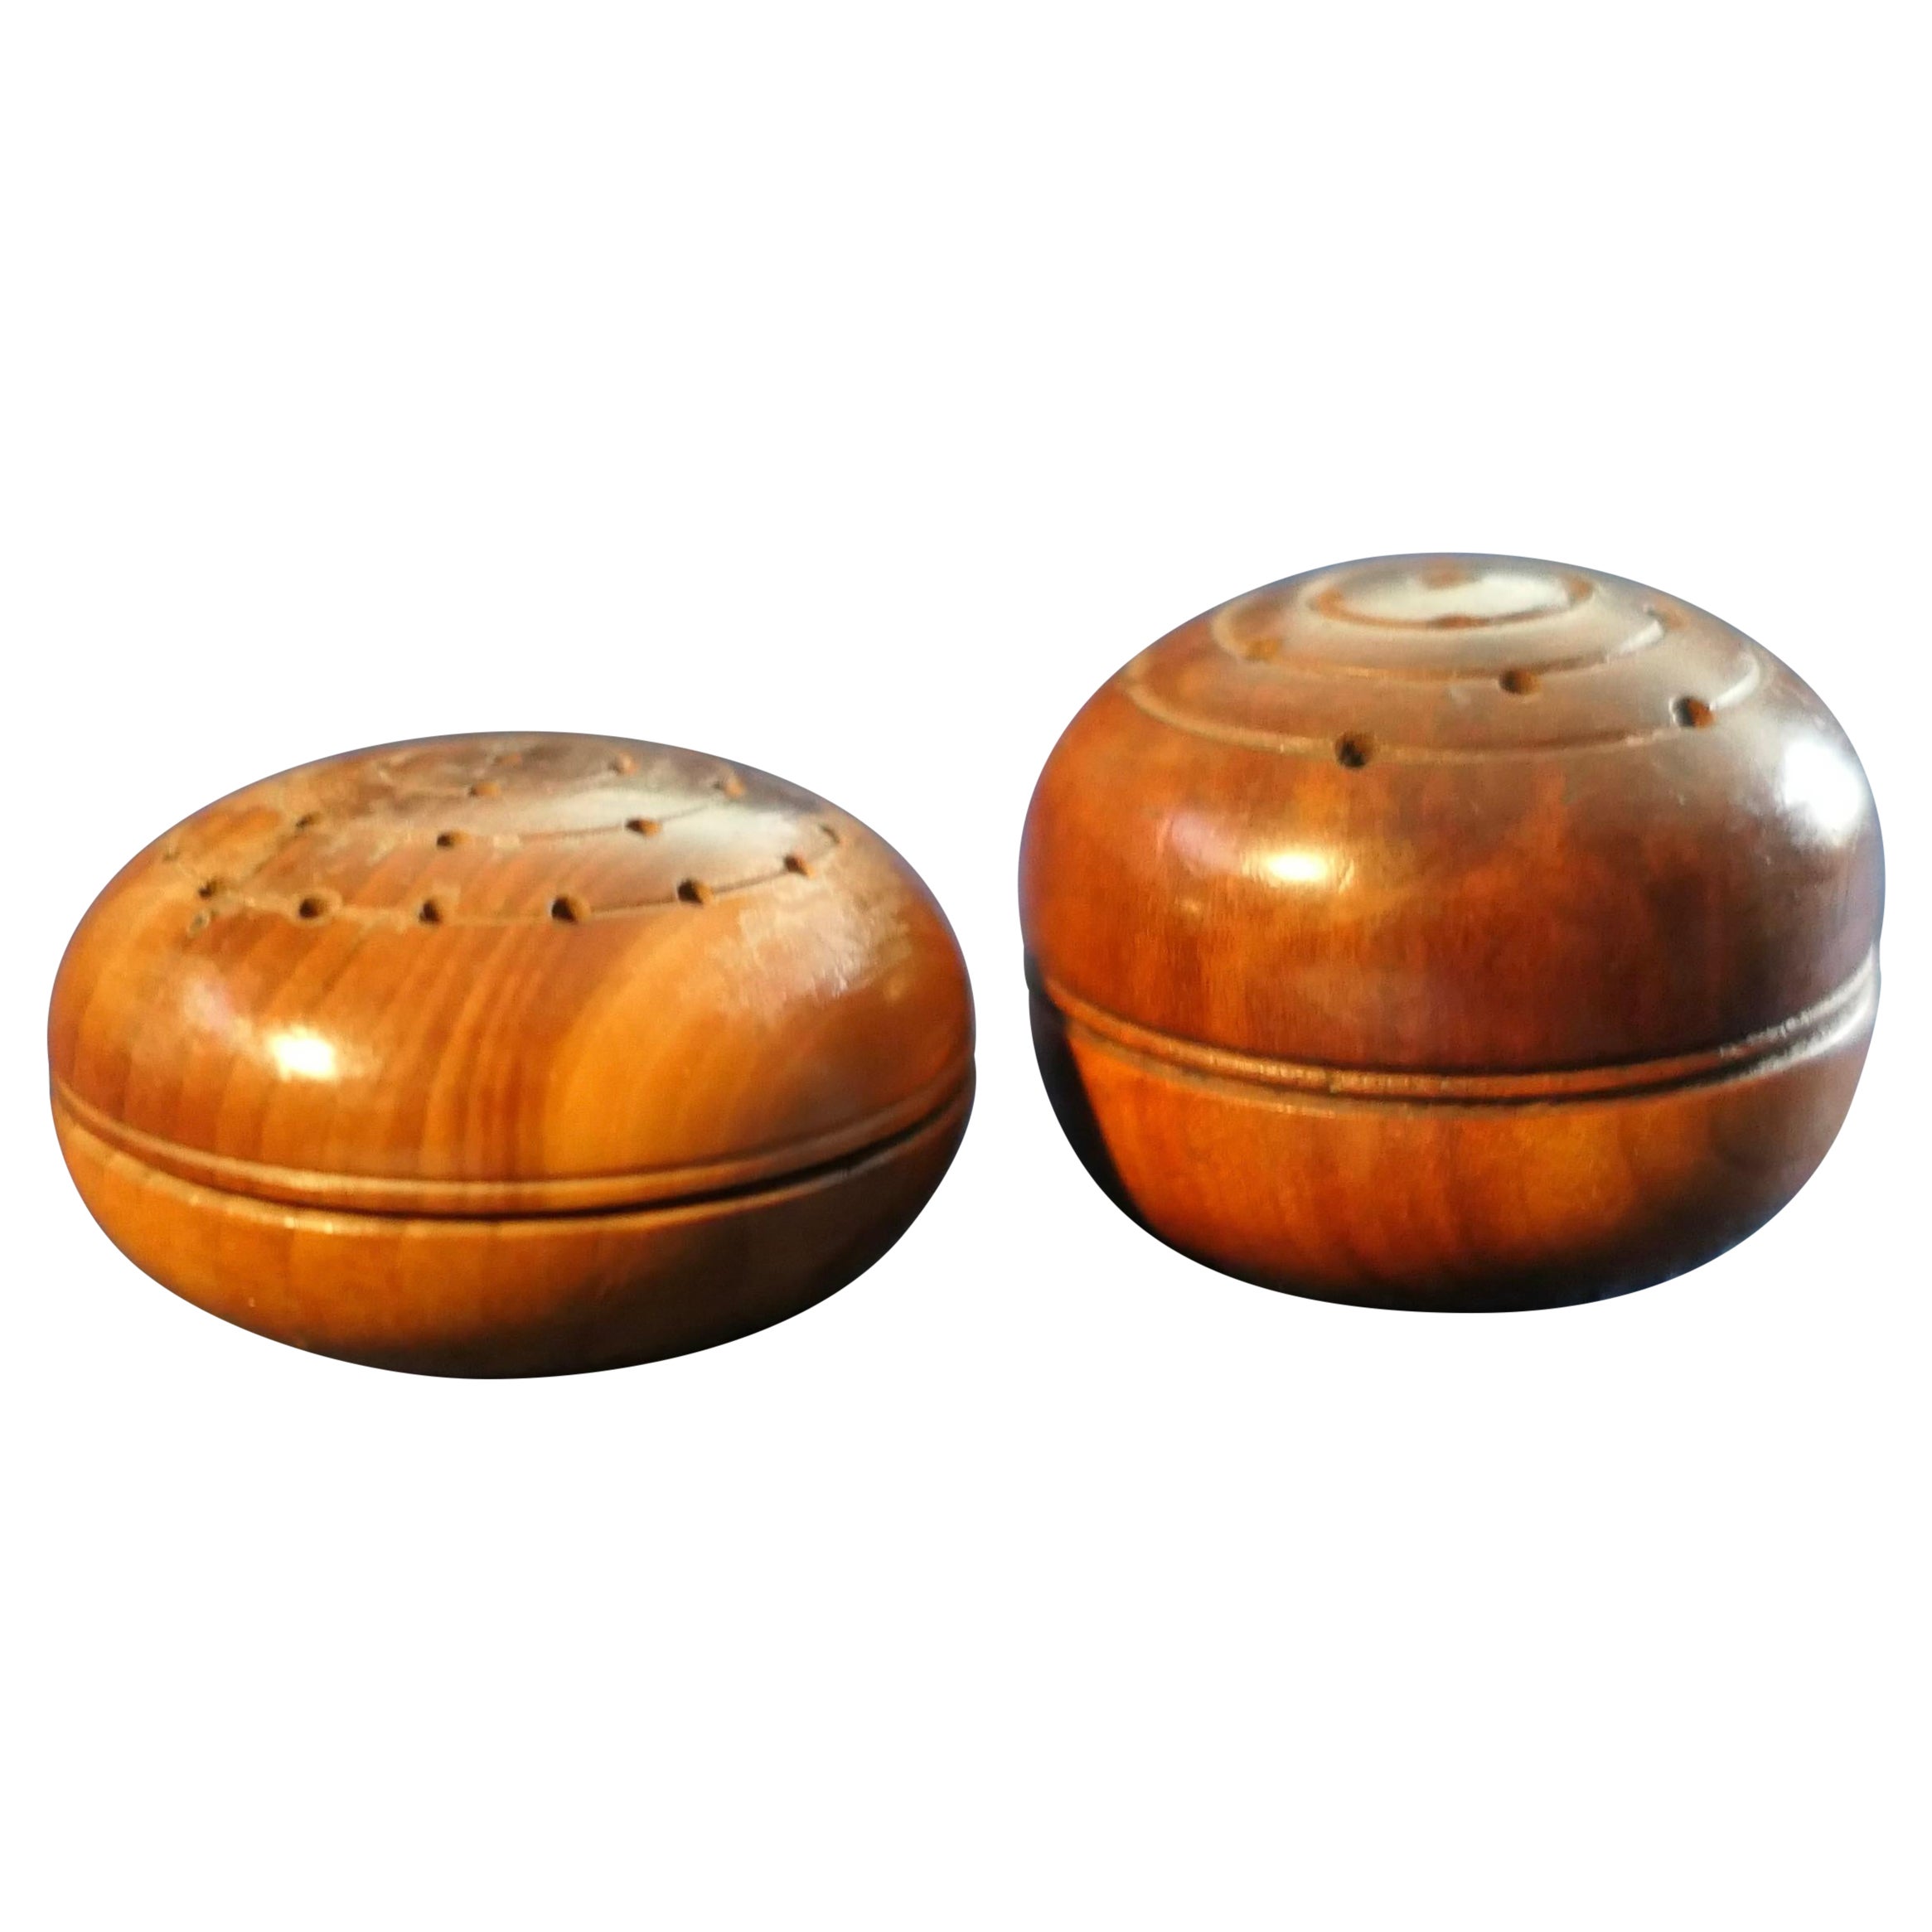 A Set of 2 Treen Pomanders in Yew Wood For Sale